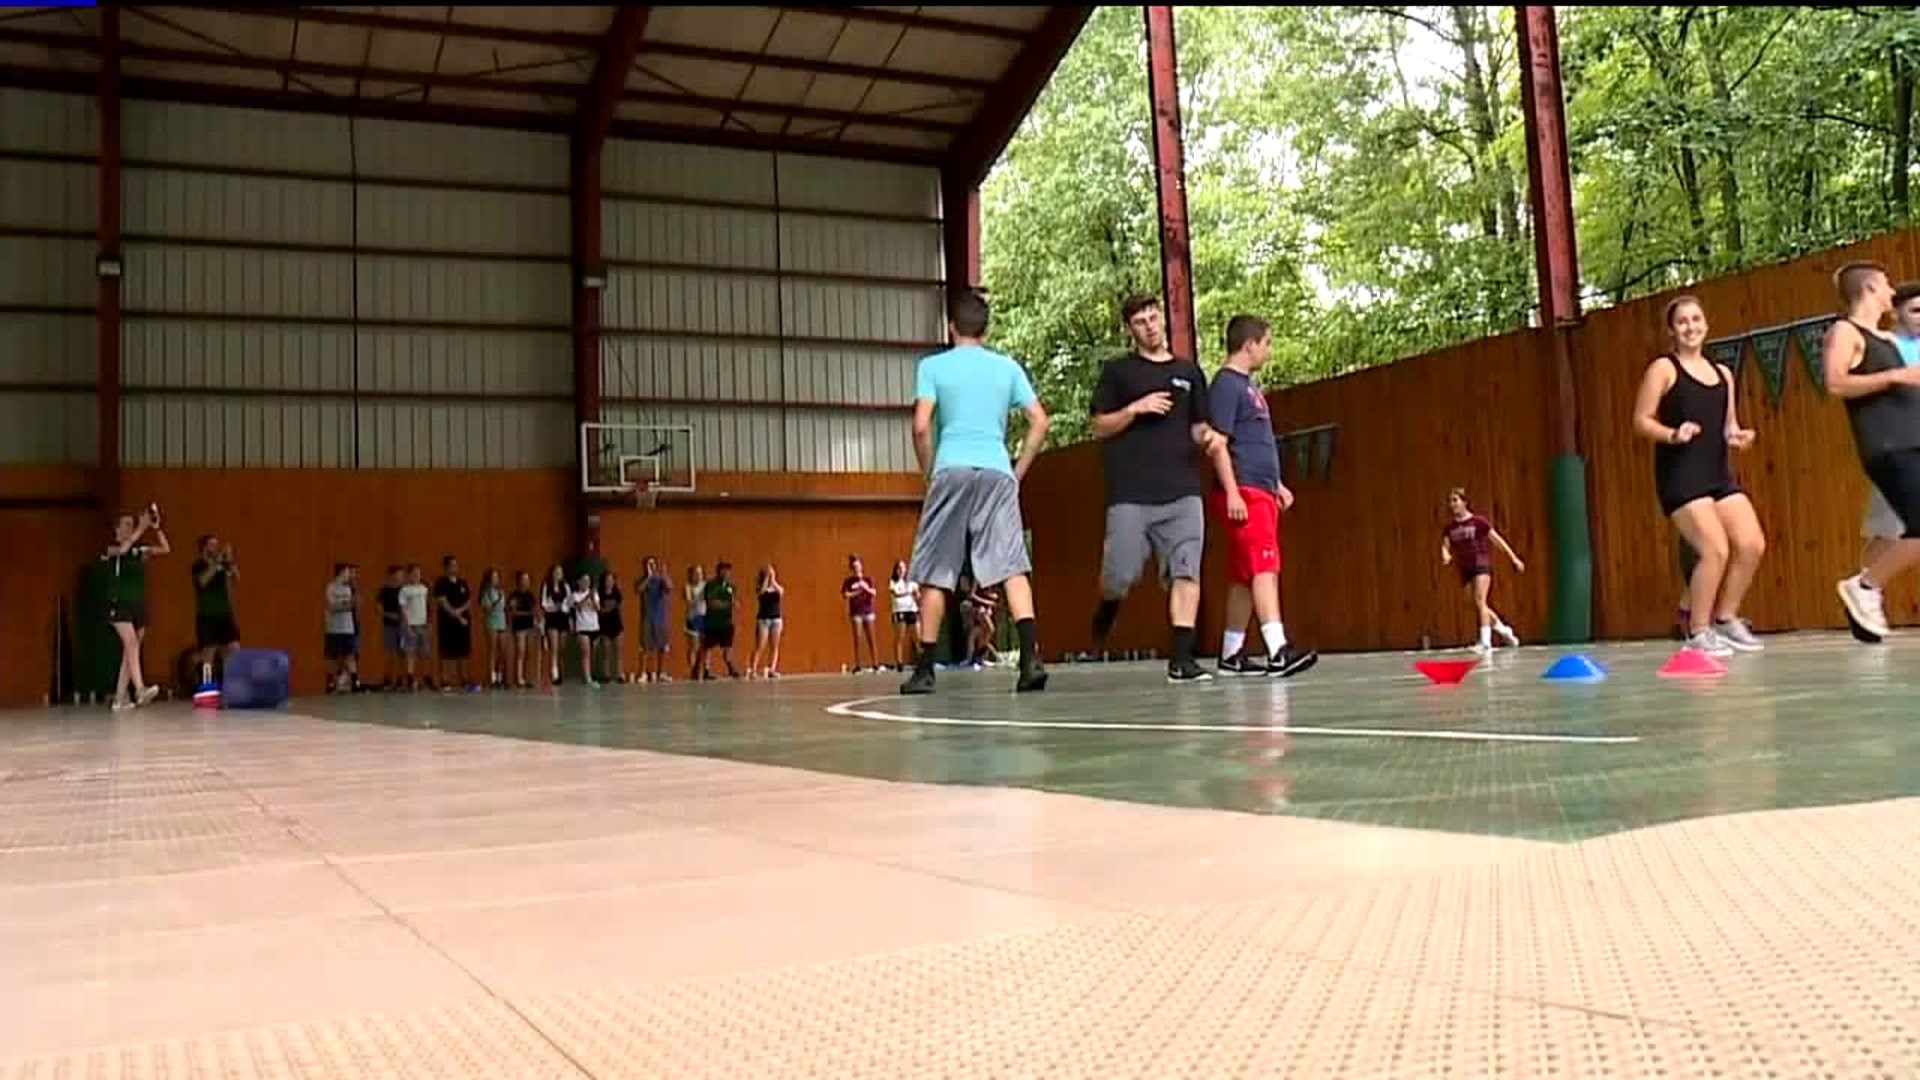 Wet Week for Summer Camps in the Poconos